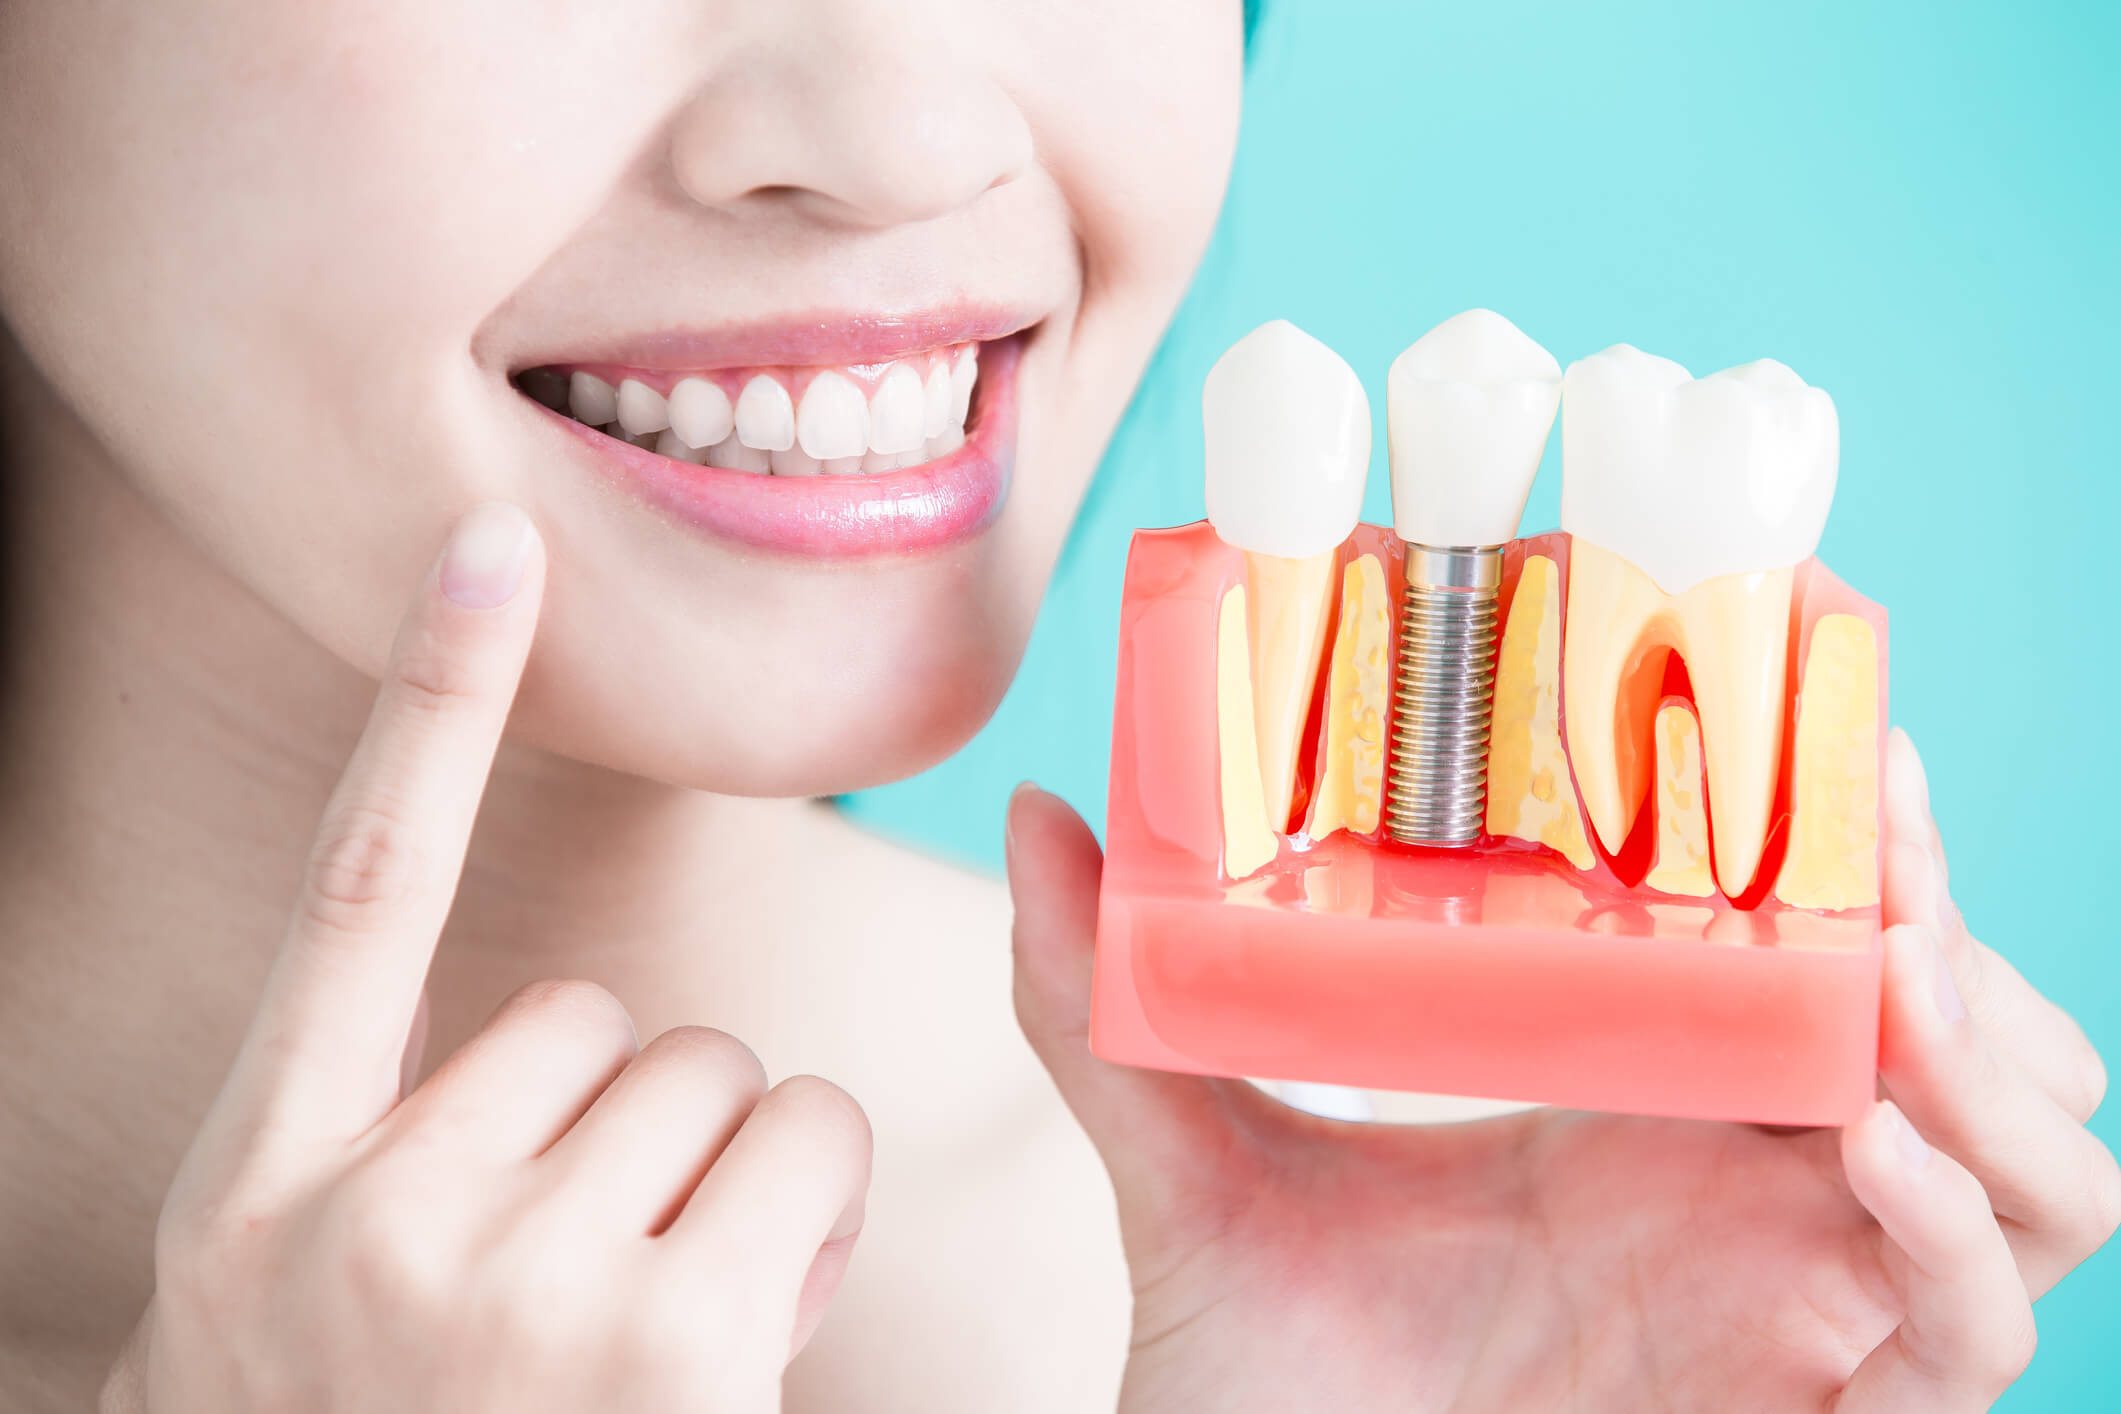 Woman smiling and pointing at teeth while holding dental implant molding